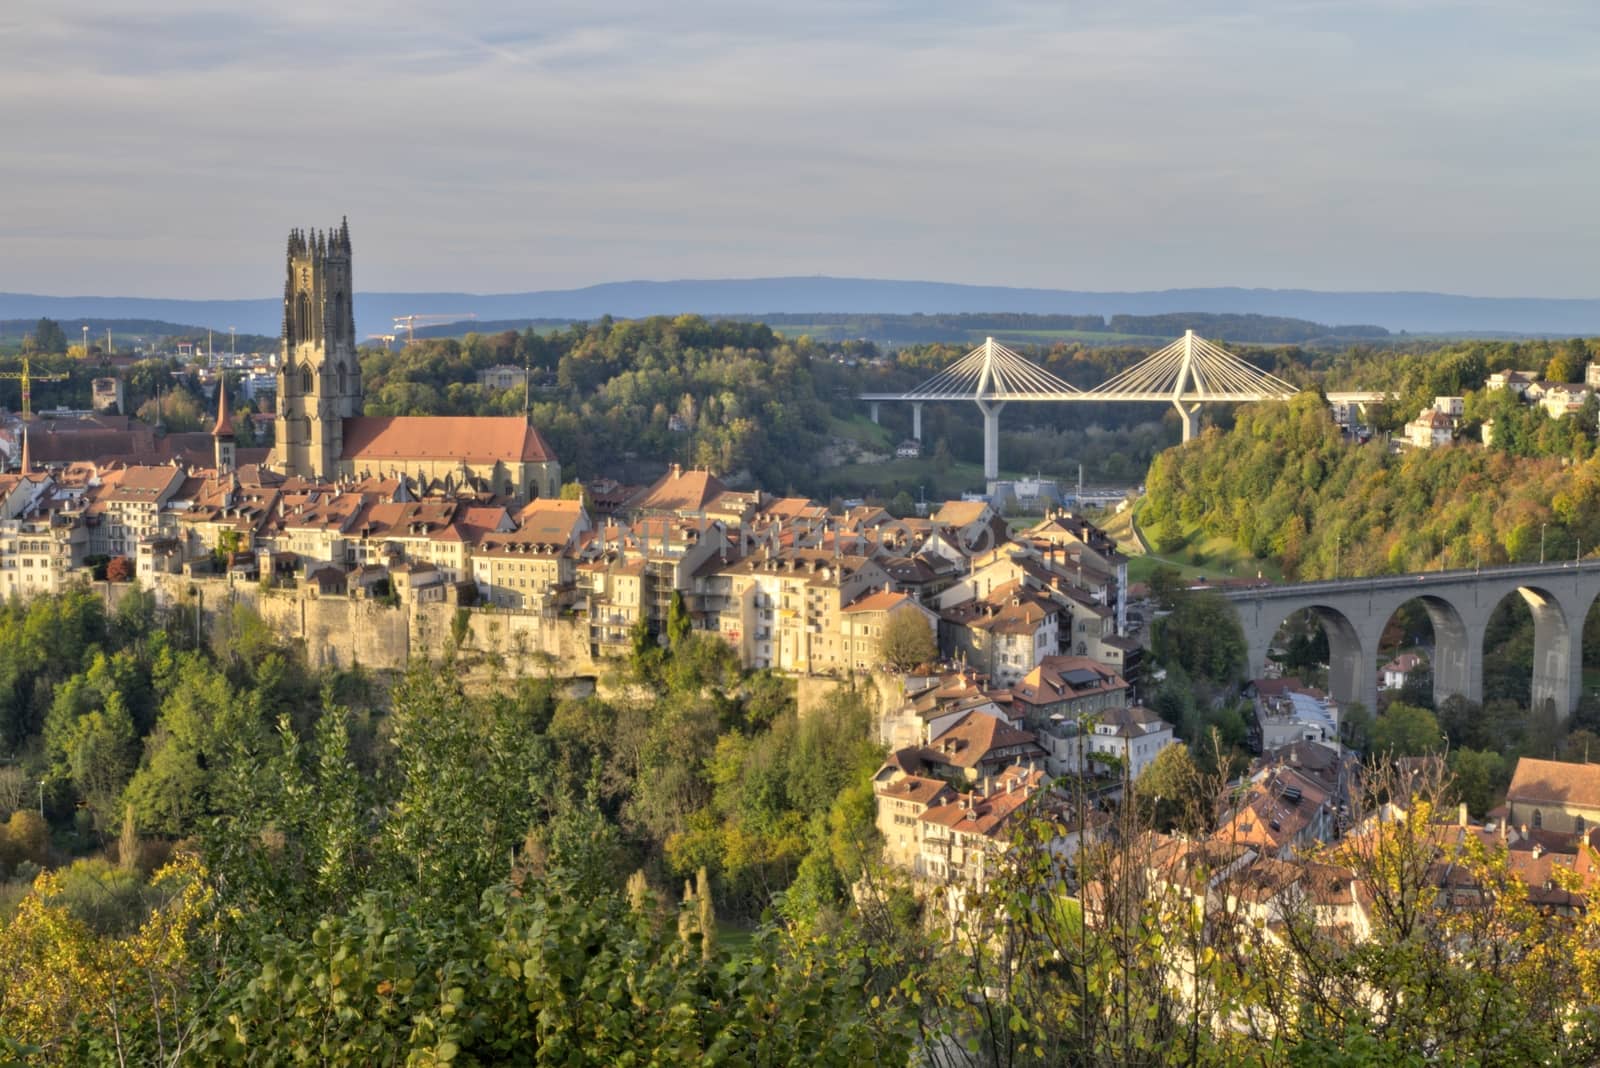 View of cathedral, Poya and Zaehringen bridge, Fribourg, Switzerland, HDR by Elenaphotos21